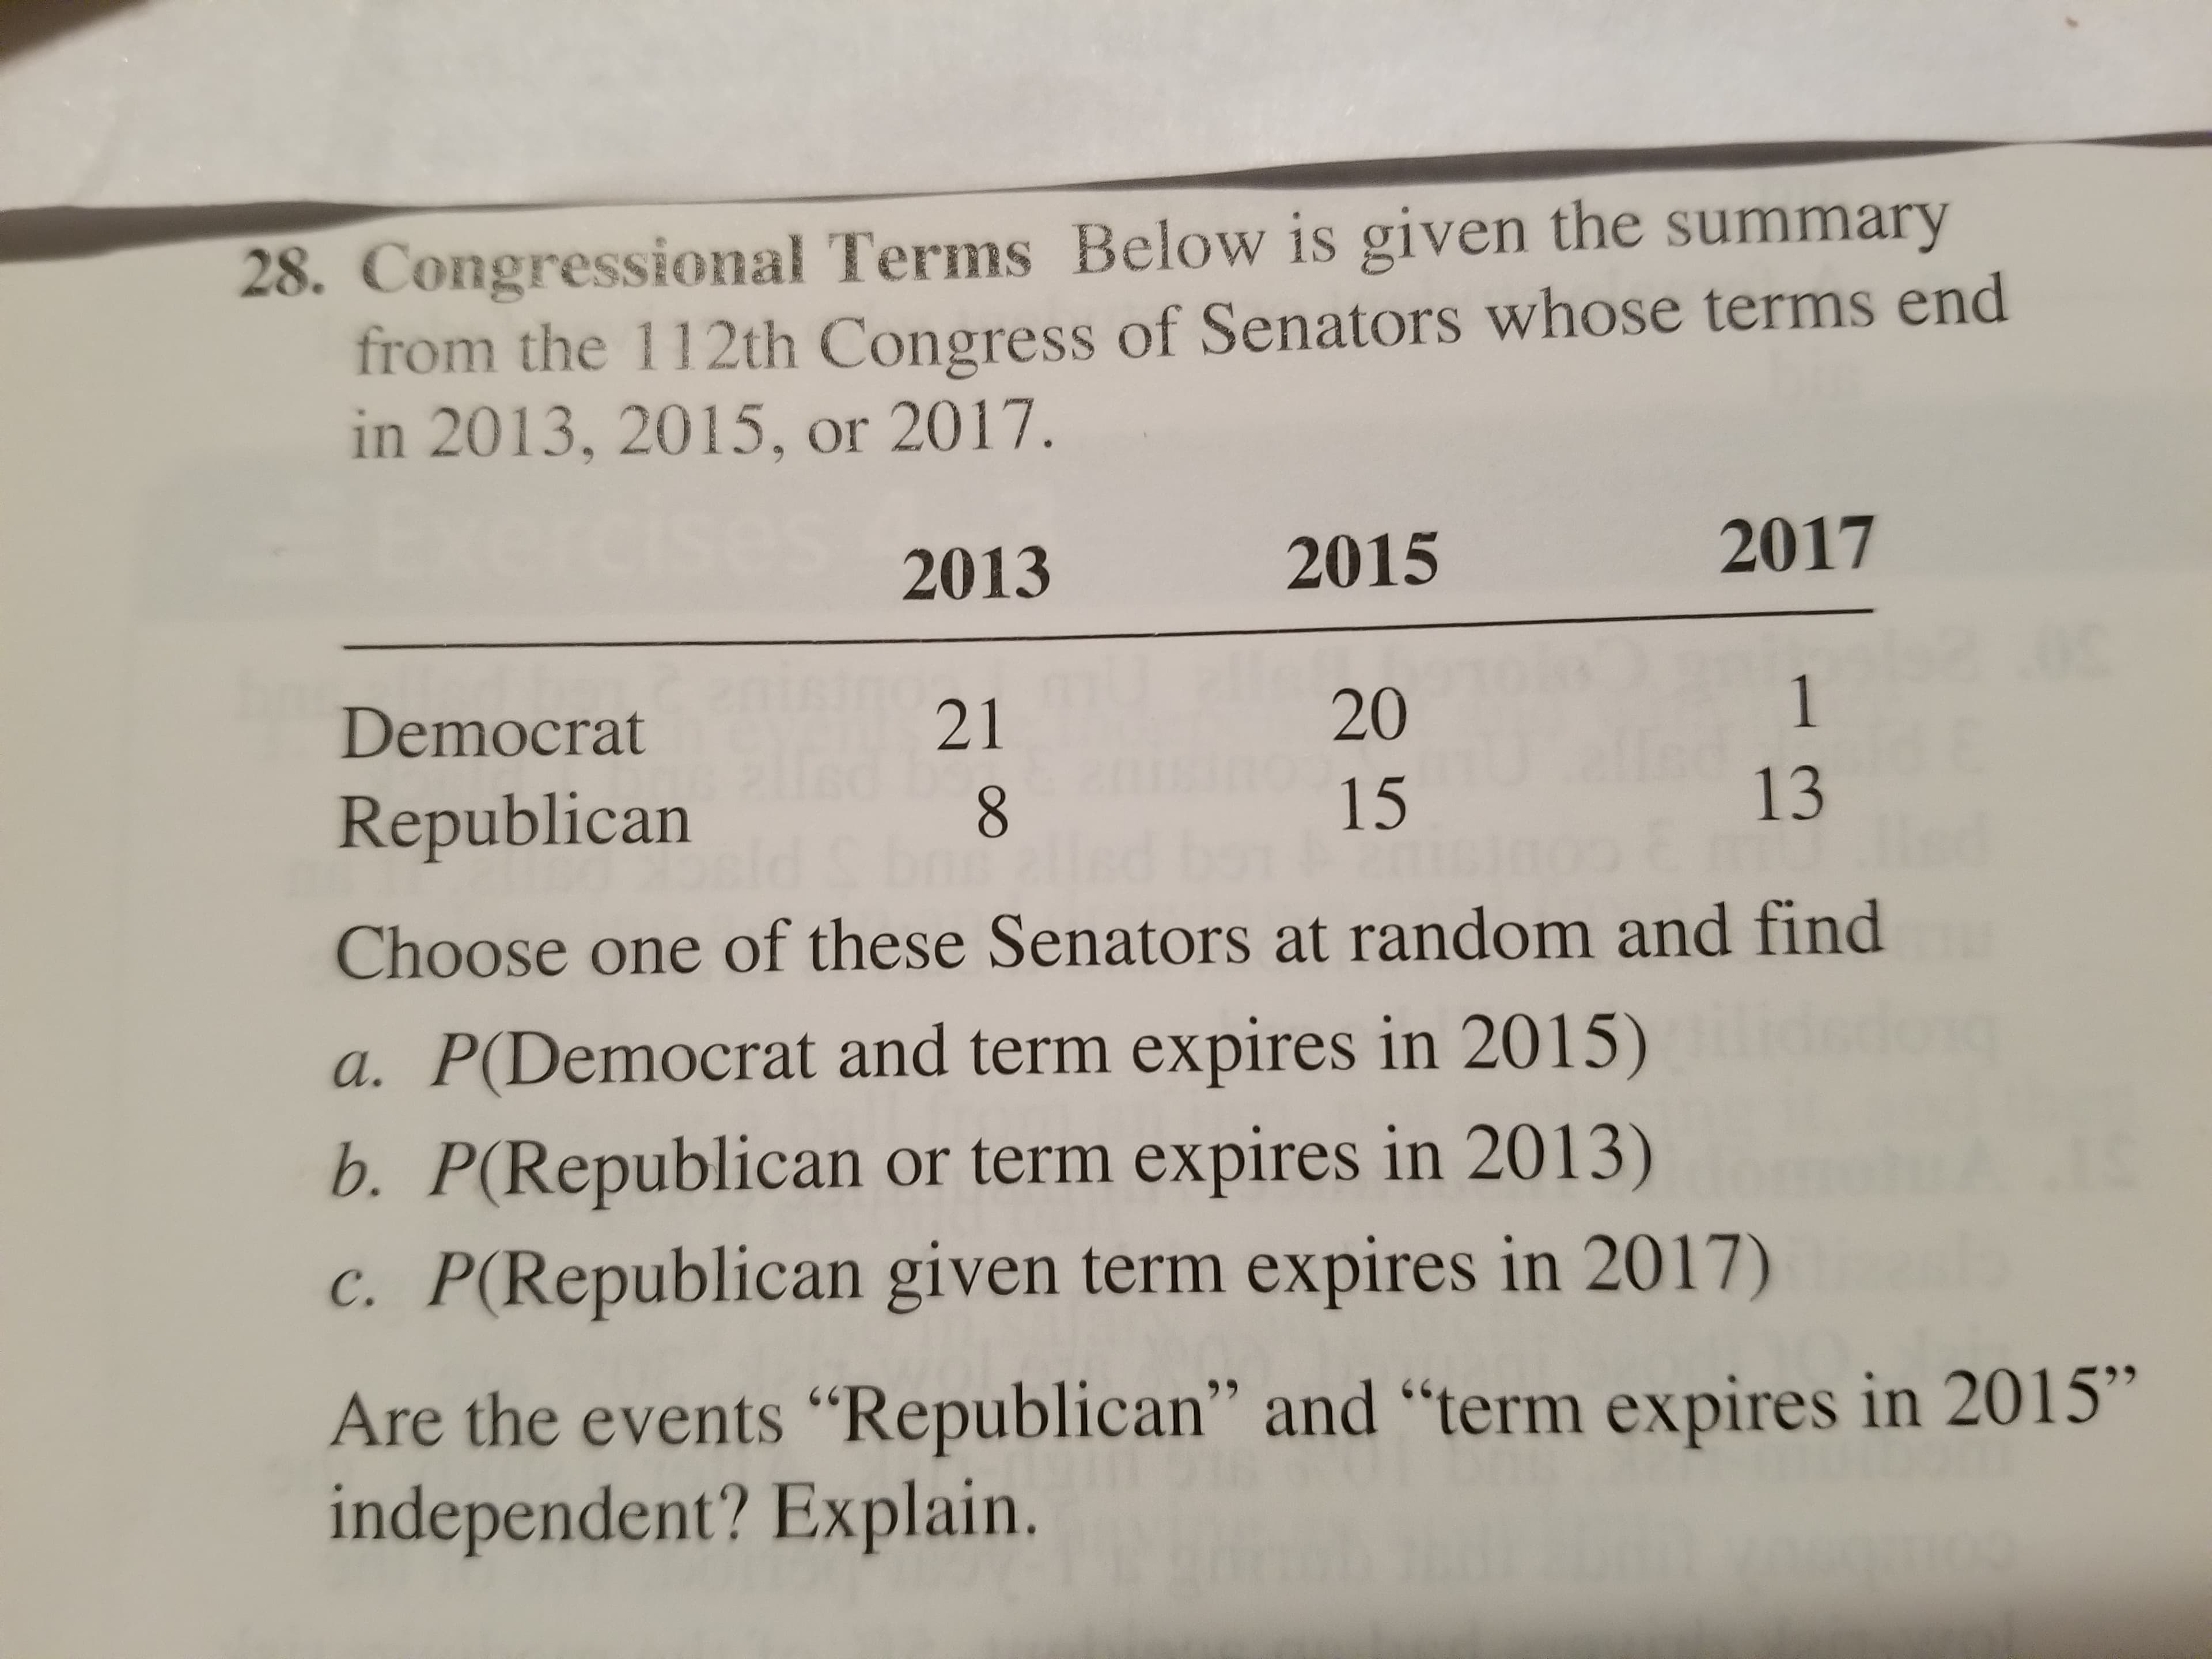 28. Congressional Terms Below is given the summary
from the 112th Congress of Senators whose terms end
in 2013, 2015, or 2017
2013
2015
2017
20
15
Democrat
Republican
Choose one of these Senators at random and find
a. P(Democrat and term expires in 2015)
b. P(Republican or term expires in 2013)
C. P(Republican given term expires in 2017)
Are the events "Republican" and "term expires in 2015"
independent? Explain.
21
13
